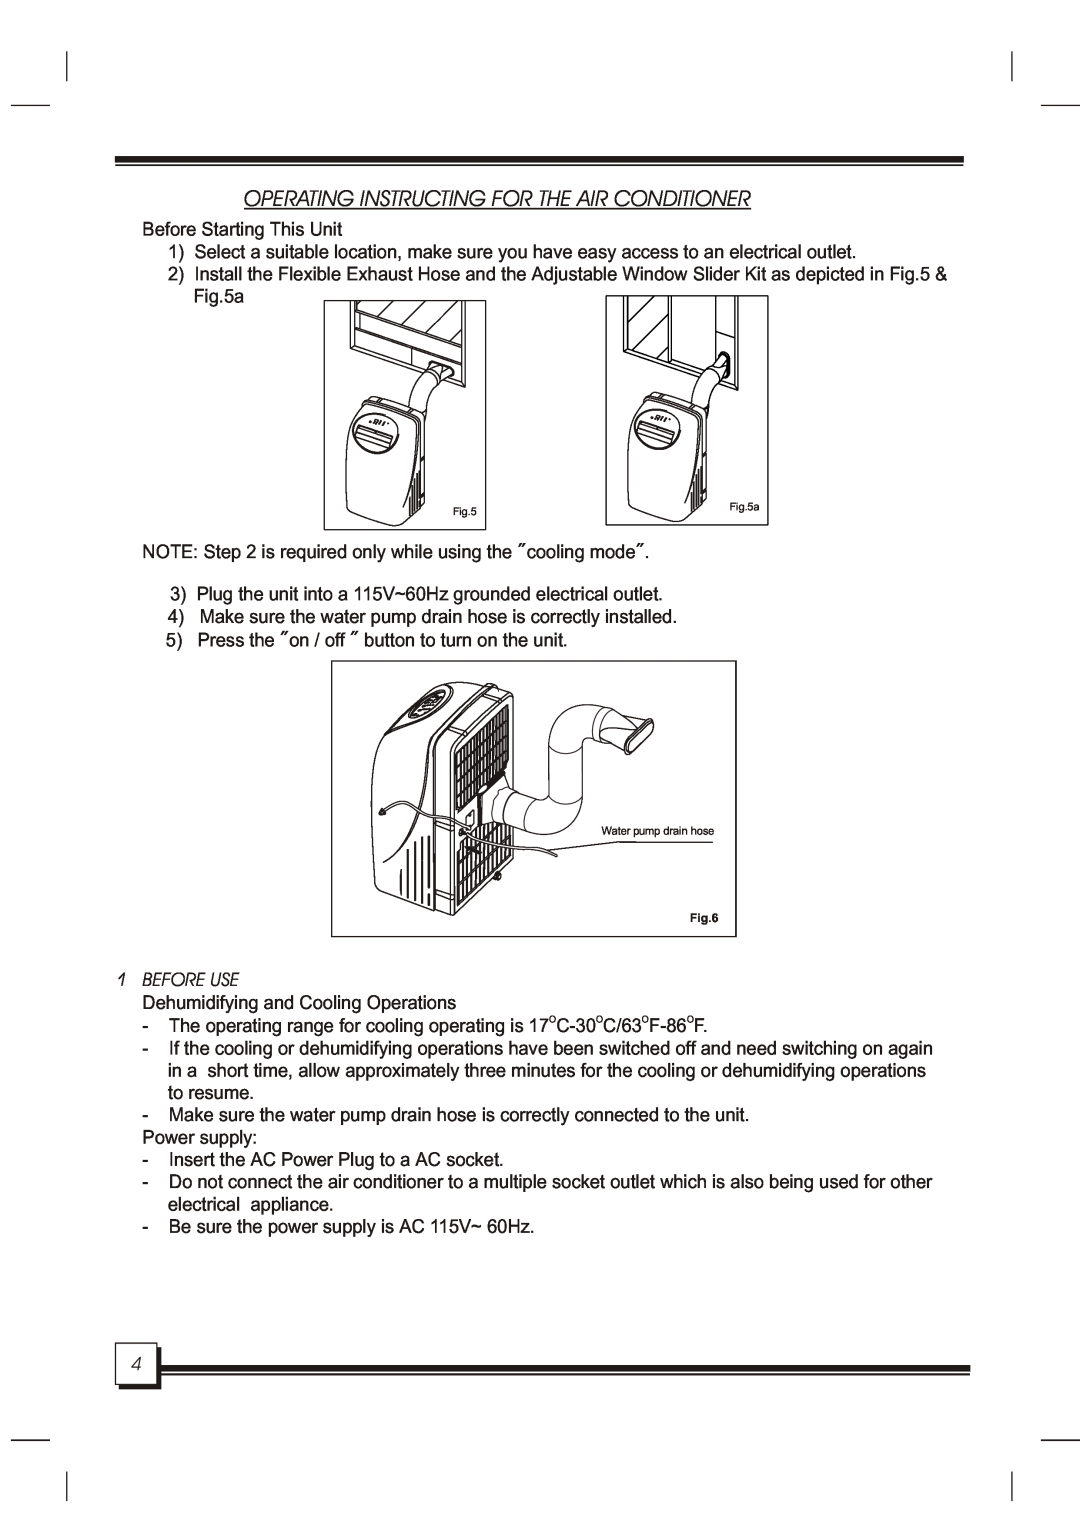 Daewoo DOC-091RH manual Operating Instructing For The Air Conditioner 